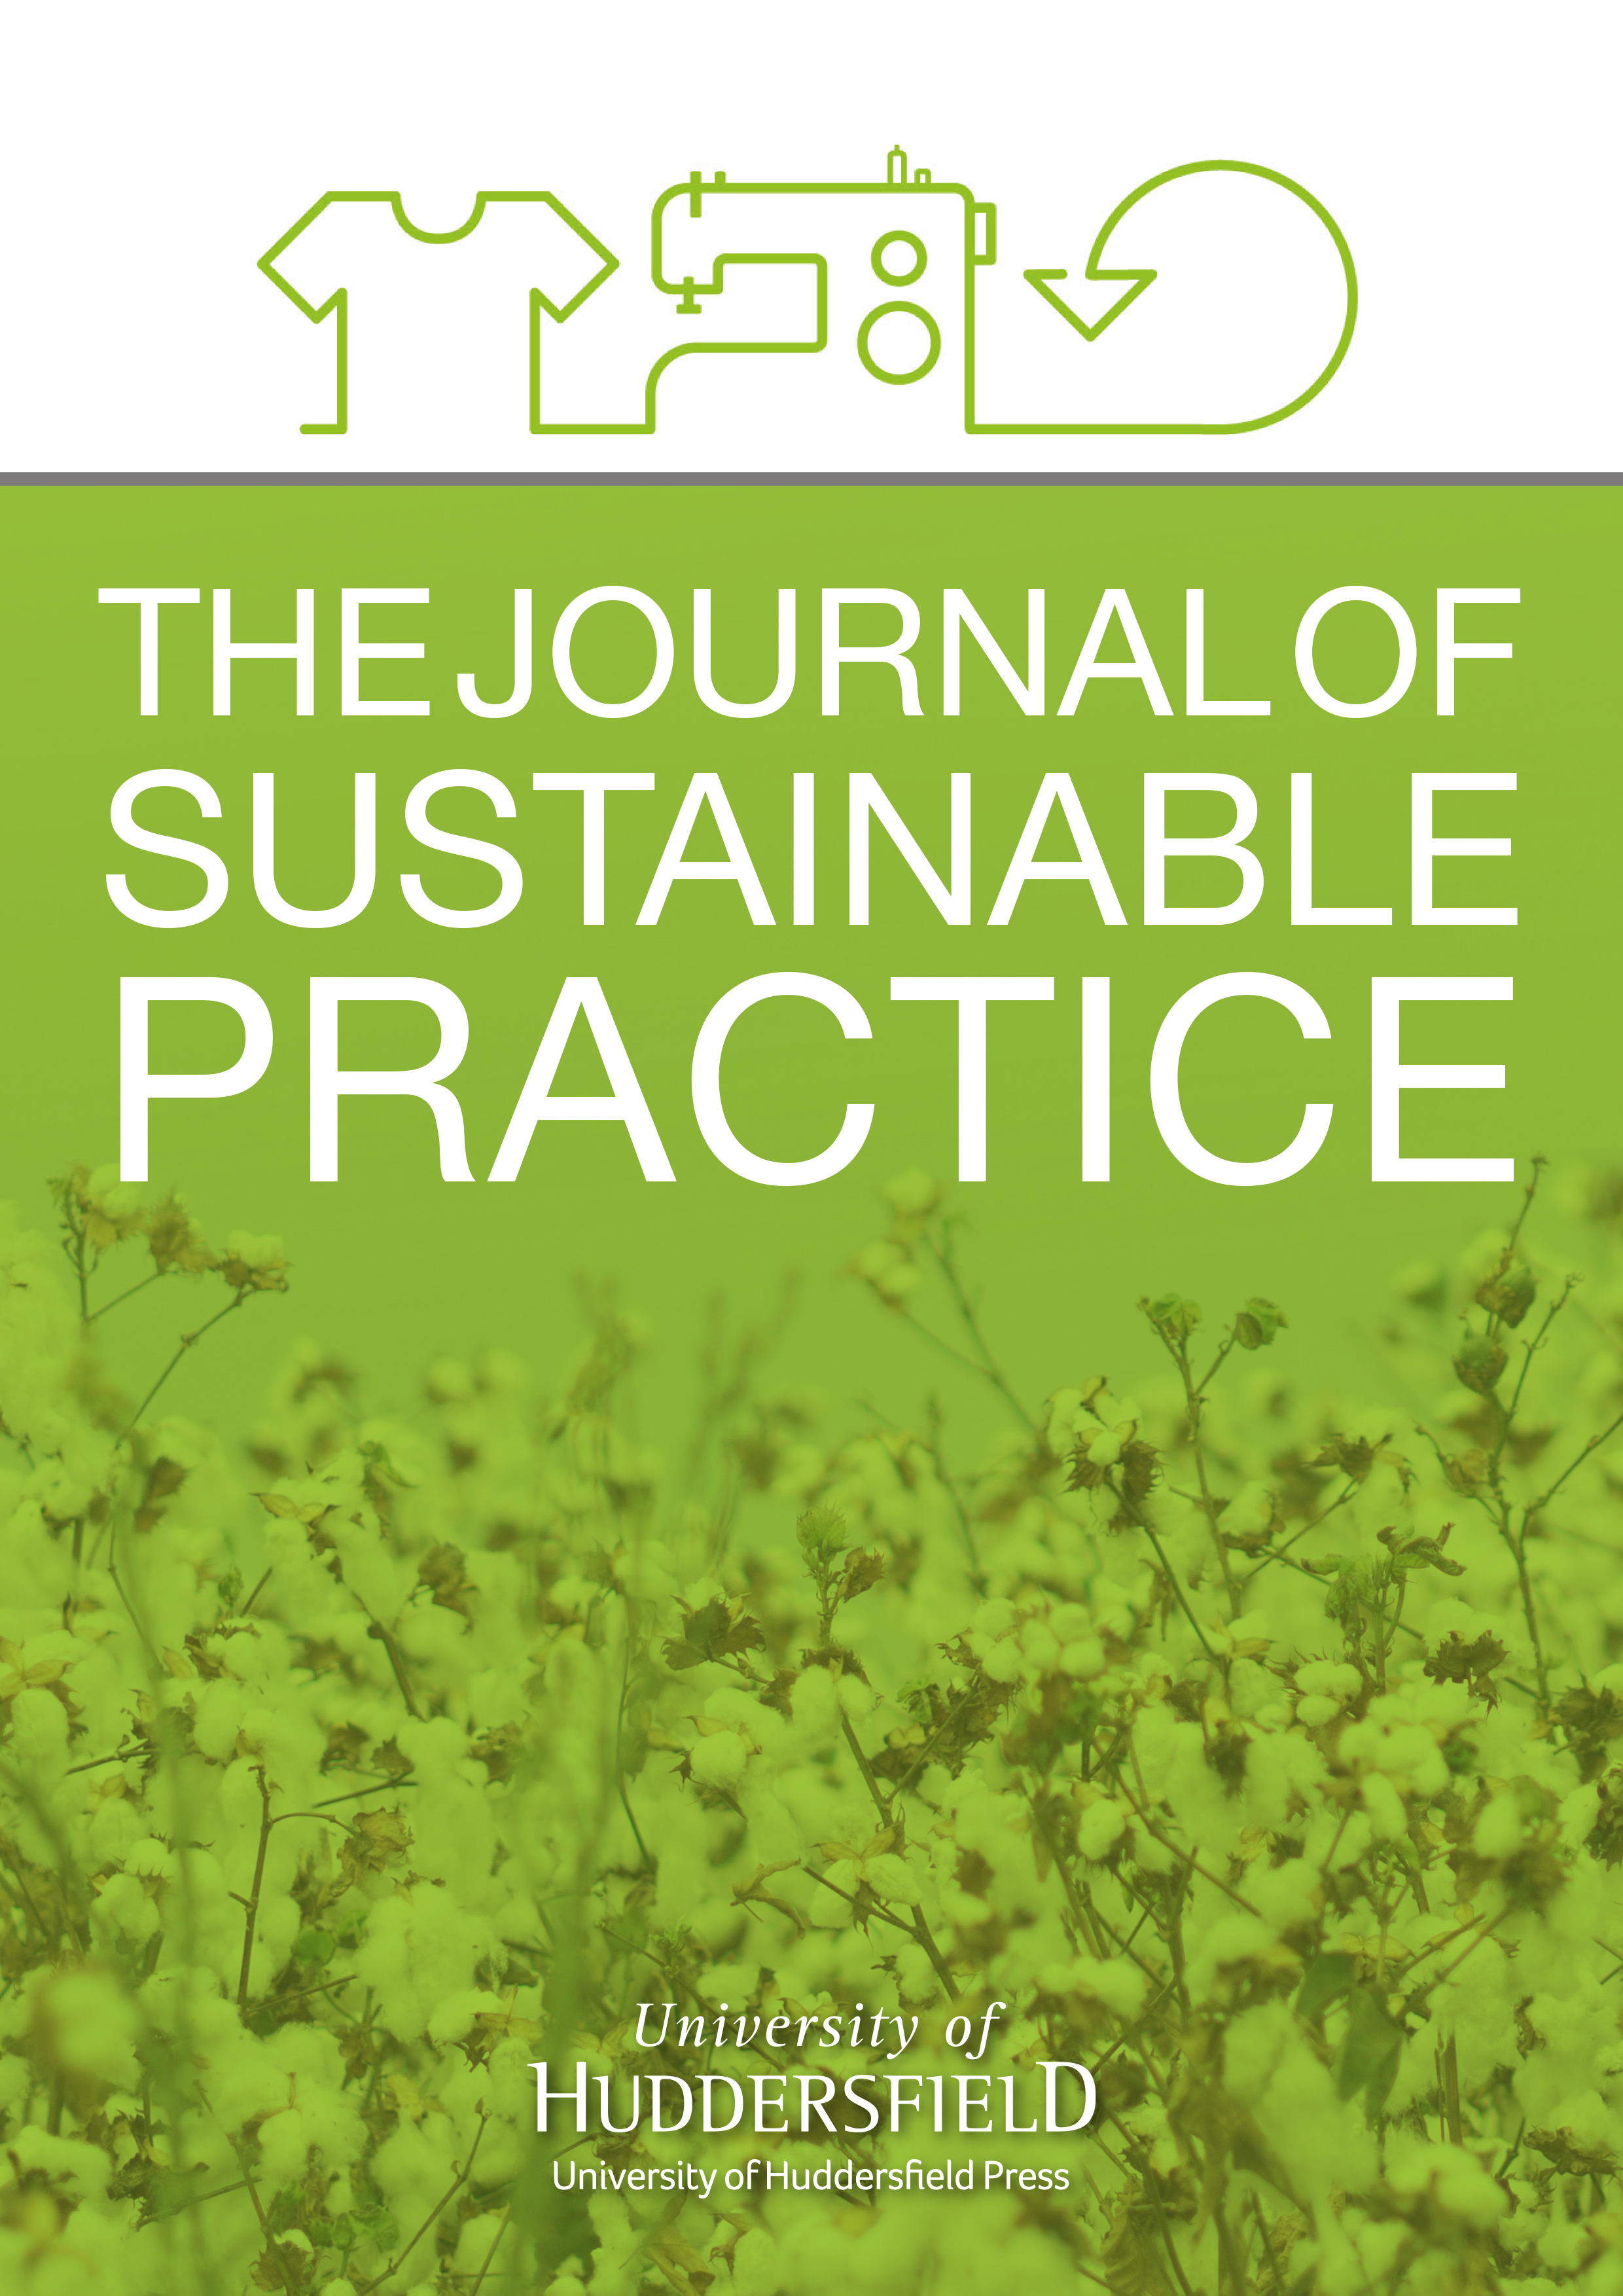 The Journal of Sustainable Practice